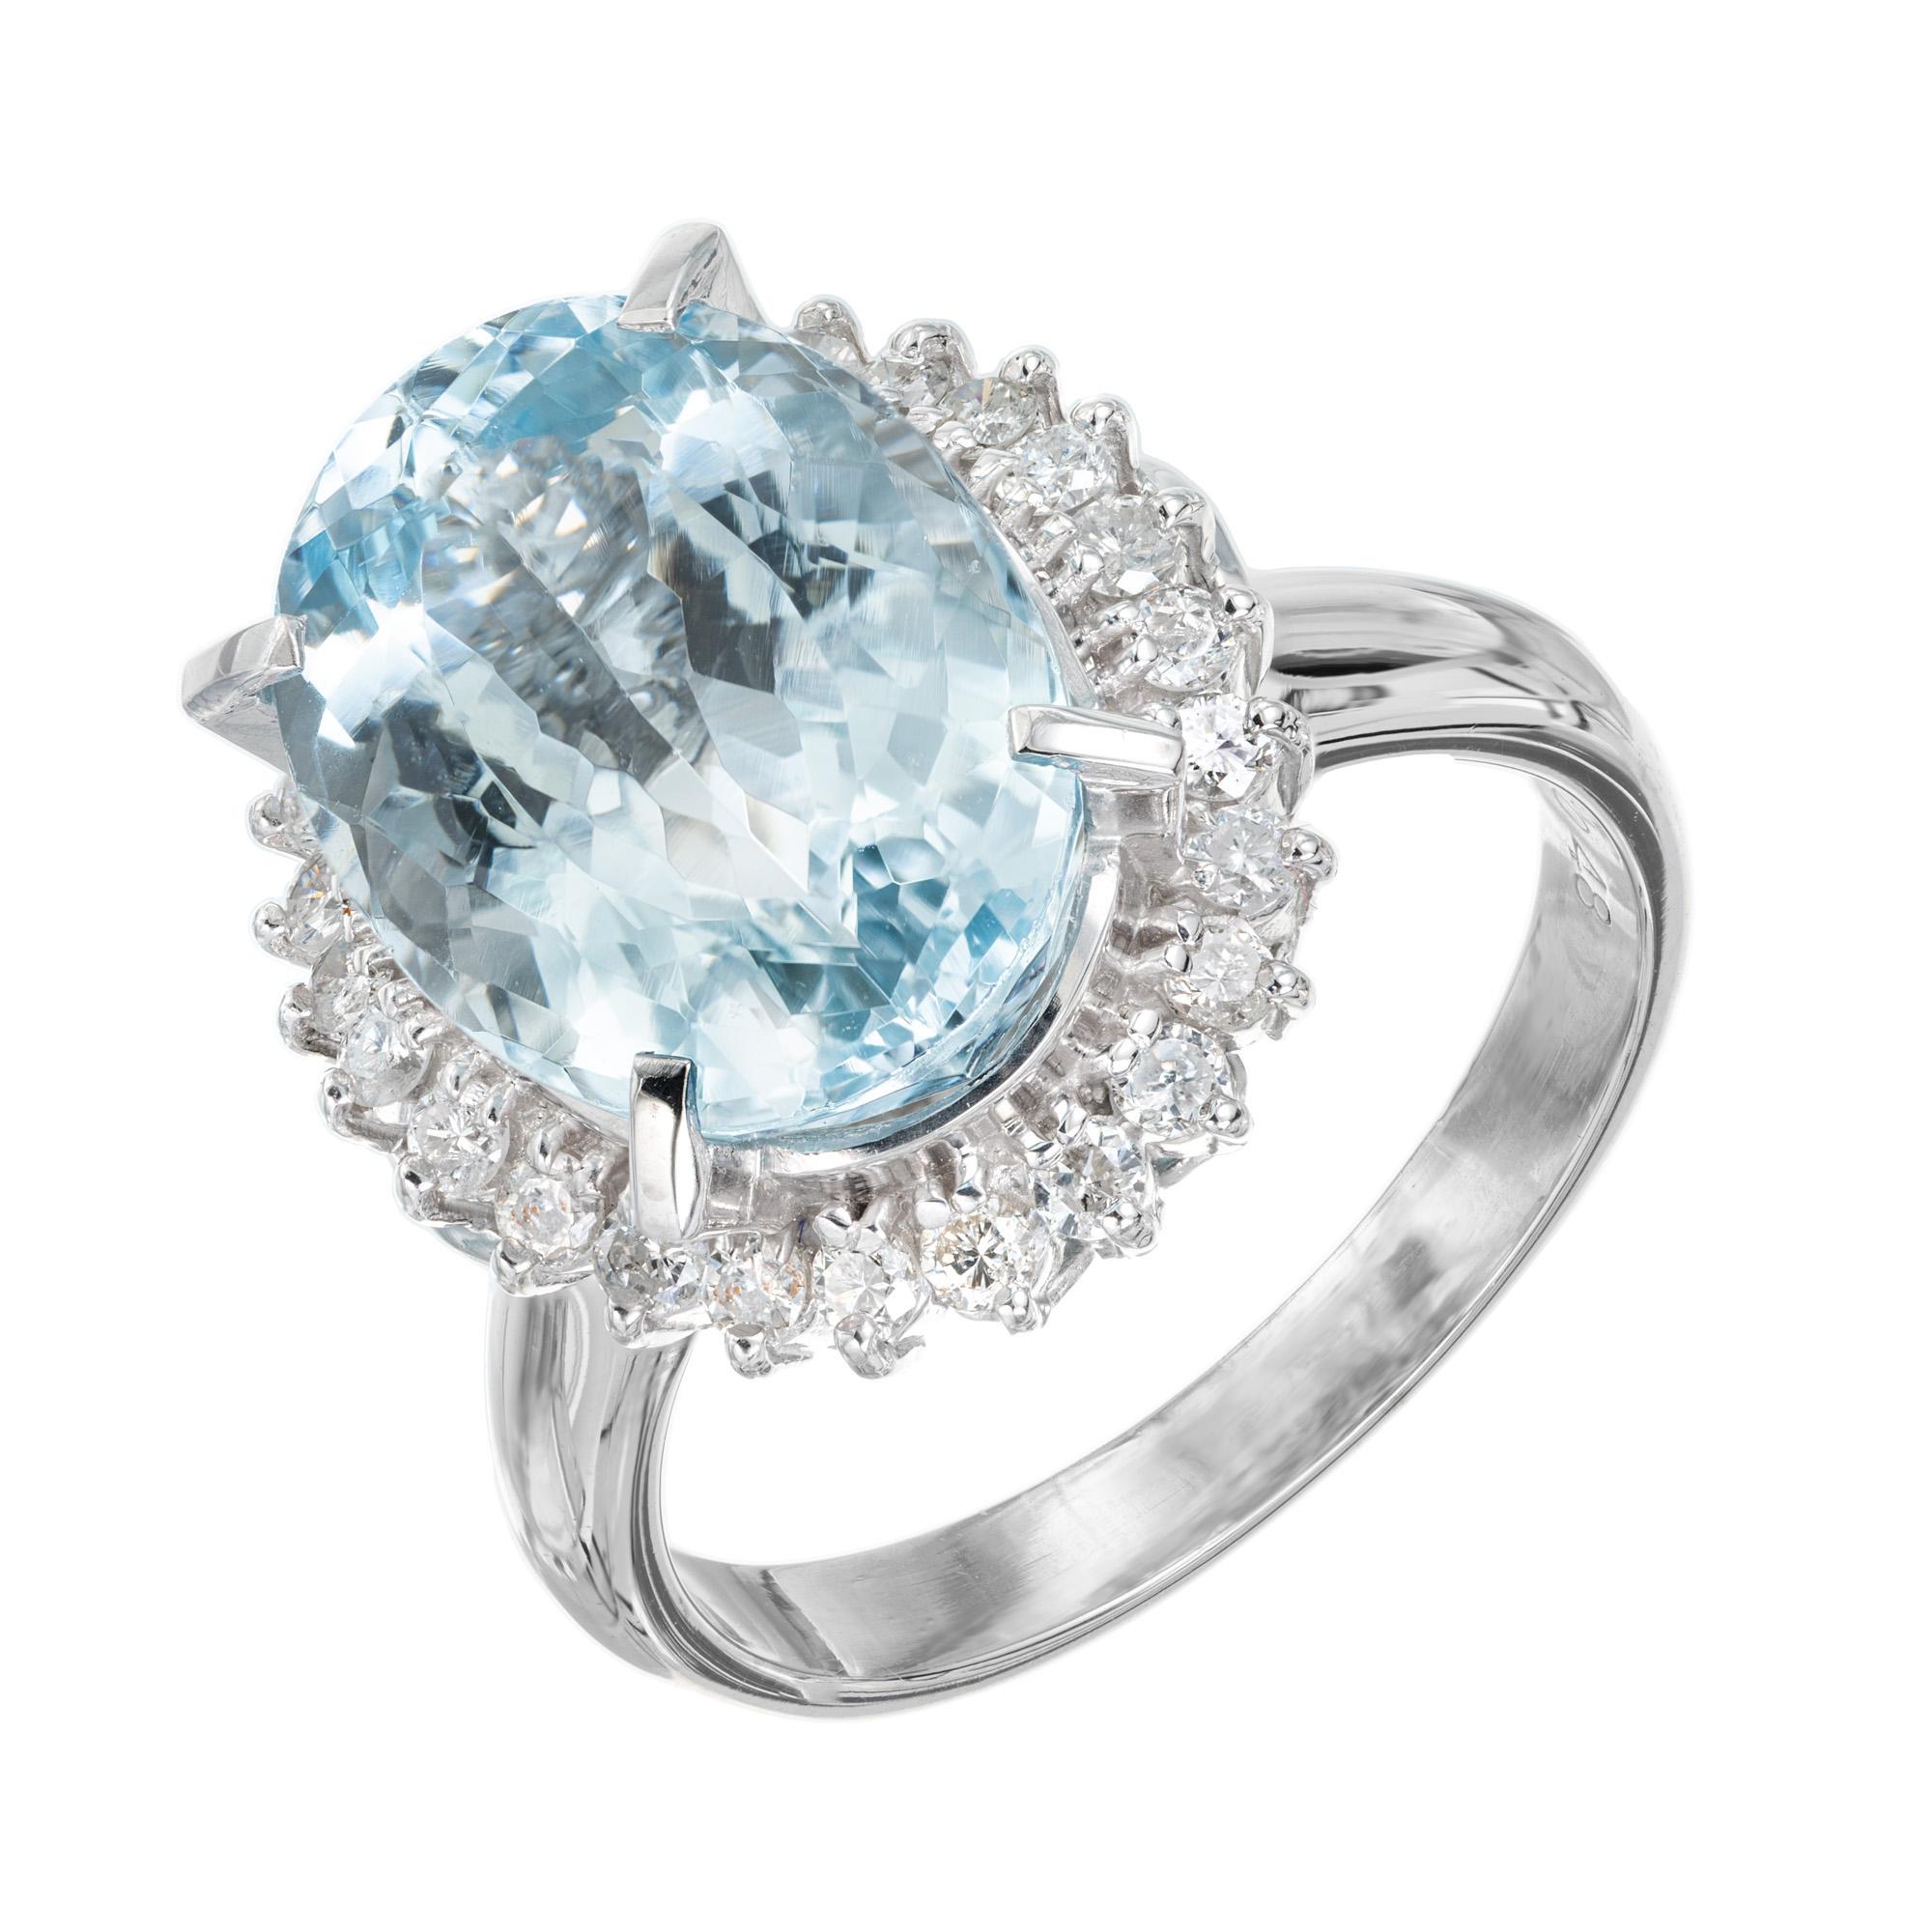 Mid-Century Bright blue clear oval aqua and diamond cocktail ring. This spectacular large 6.25ct oval aquamarine center stone is mounted in a handmade platinum setting with a 26 round brilliant cut diamond halo.  Circa 1950-1960.

1 oval blue aqua,